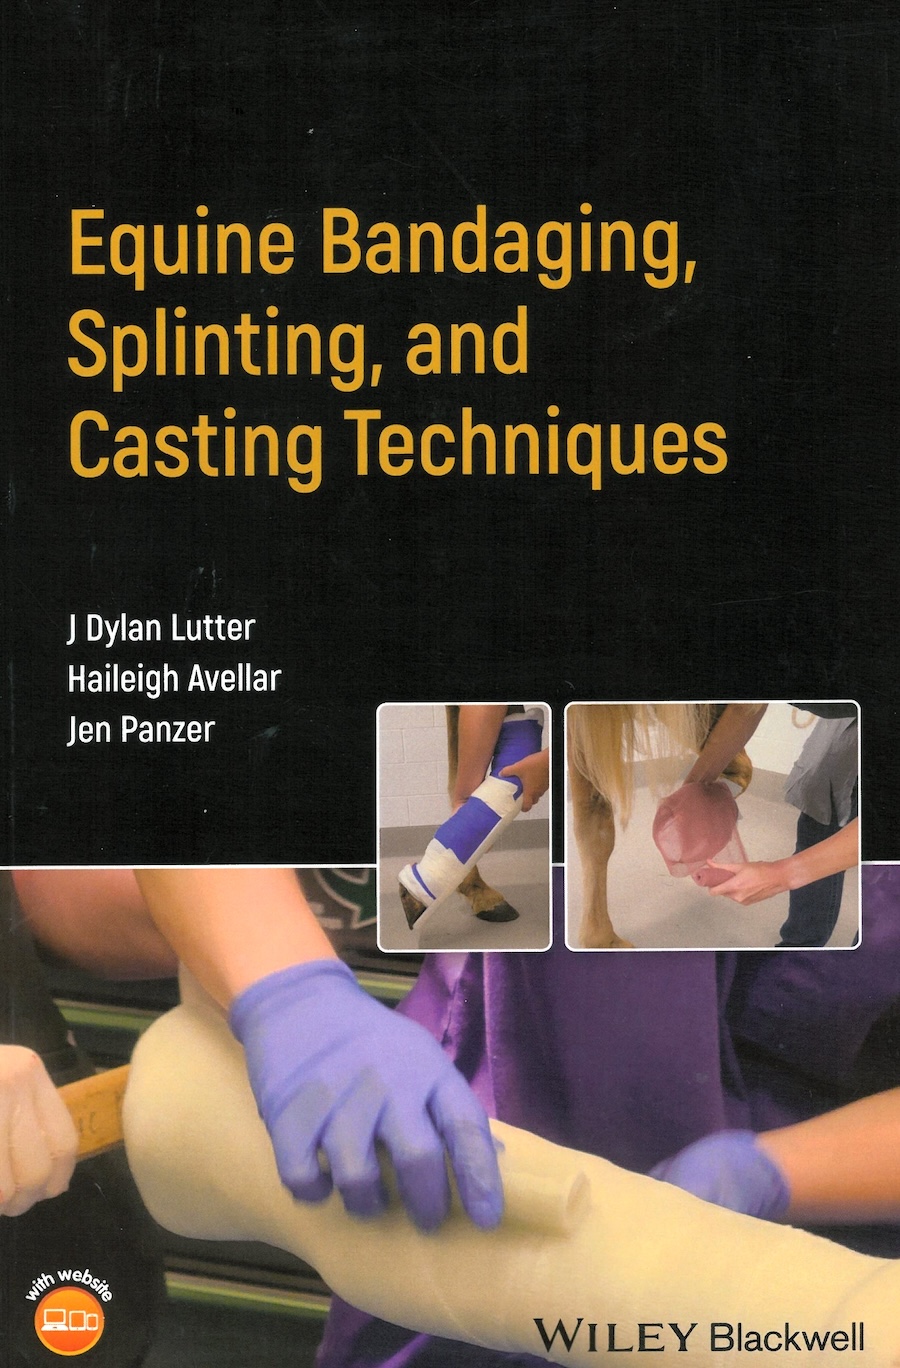 Equine bandaging, splinting, and casting techniques